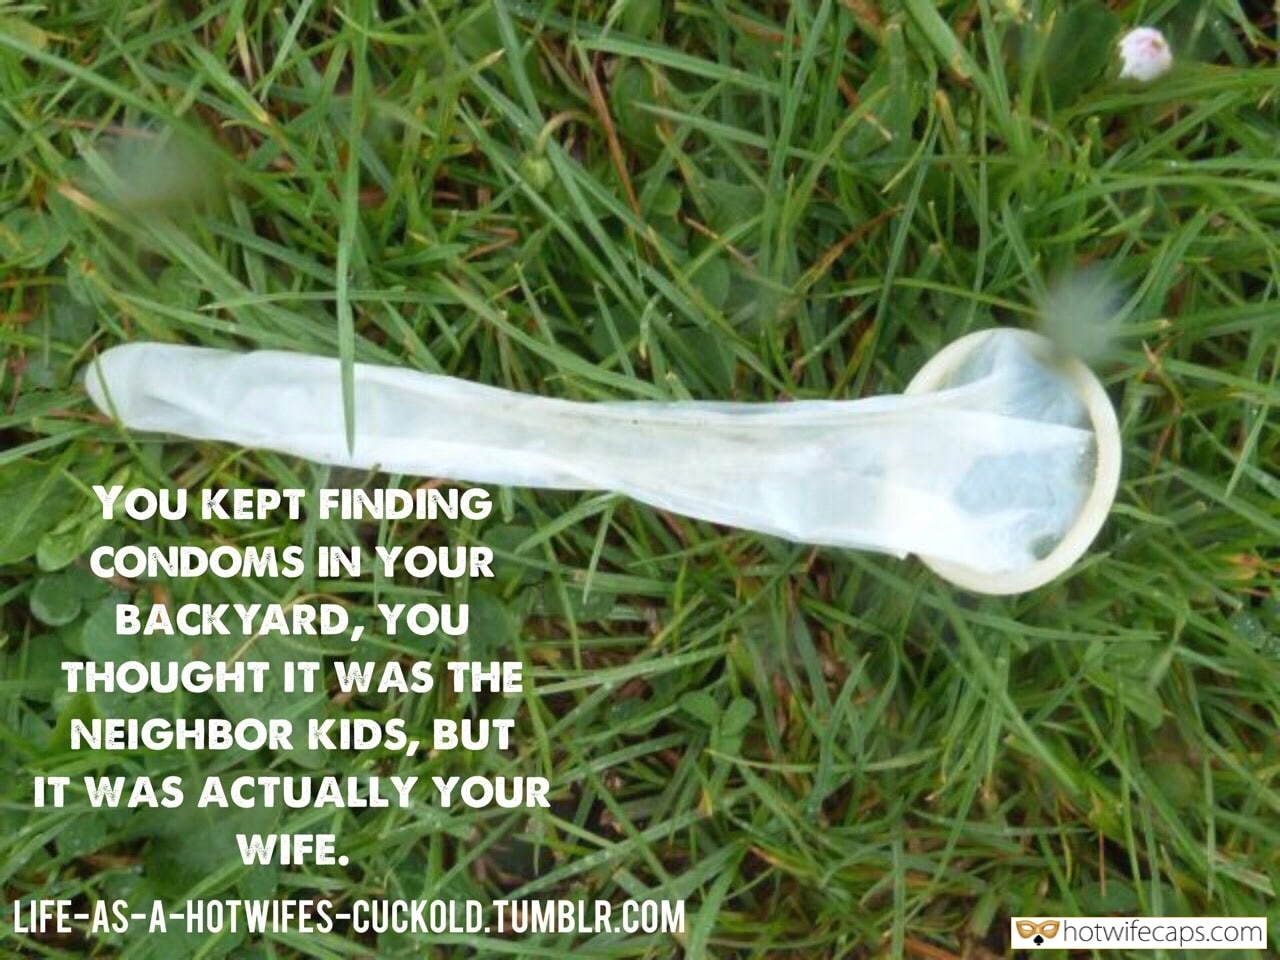 Sexy Memes Cheating hotwife caption: YOU KEPT FINDING CONDOMS IN YOUR BACKYARD, YOU THOUGHT IT WAS THE NEIGHBOR KIDS, BUT IT WAS ACTUALLY YOUR WIFE.  sex with out condoms captions Your Wife Left Long Condom Full of Cum in Your Backyard